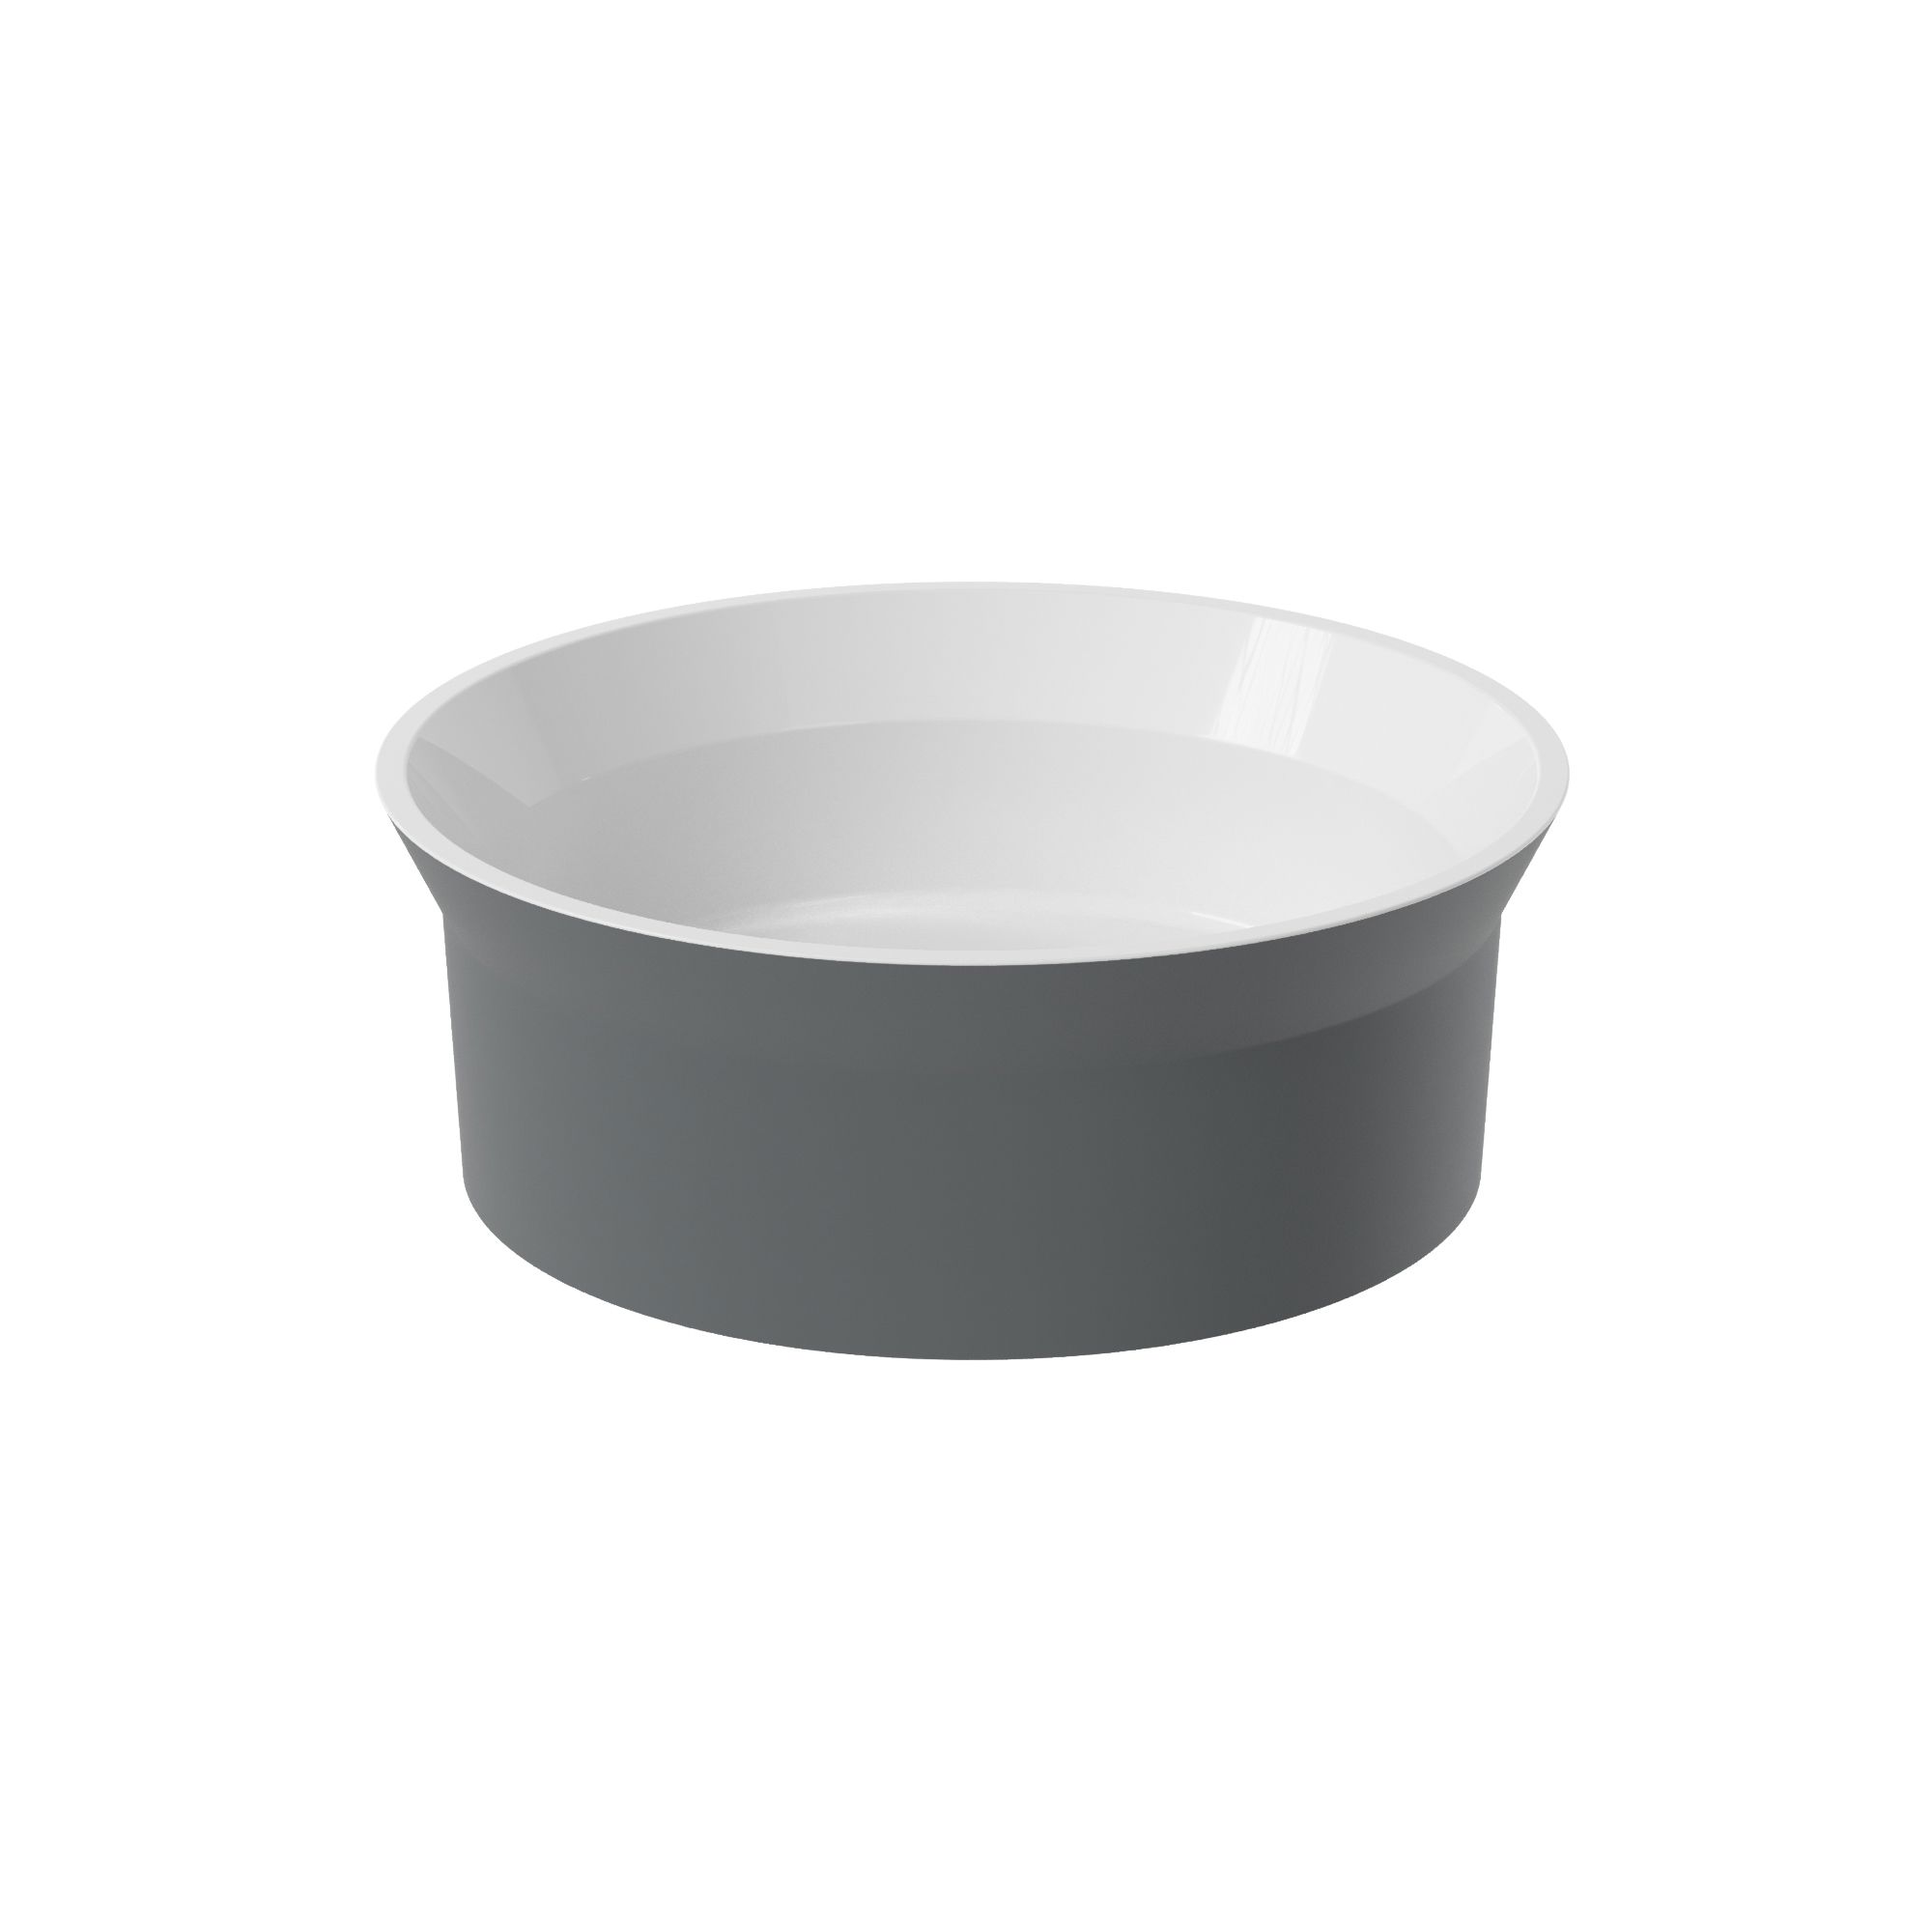 The Ayla Countertop Round Basin & Waste Cover